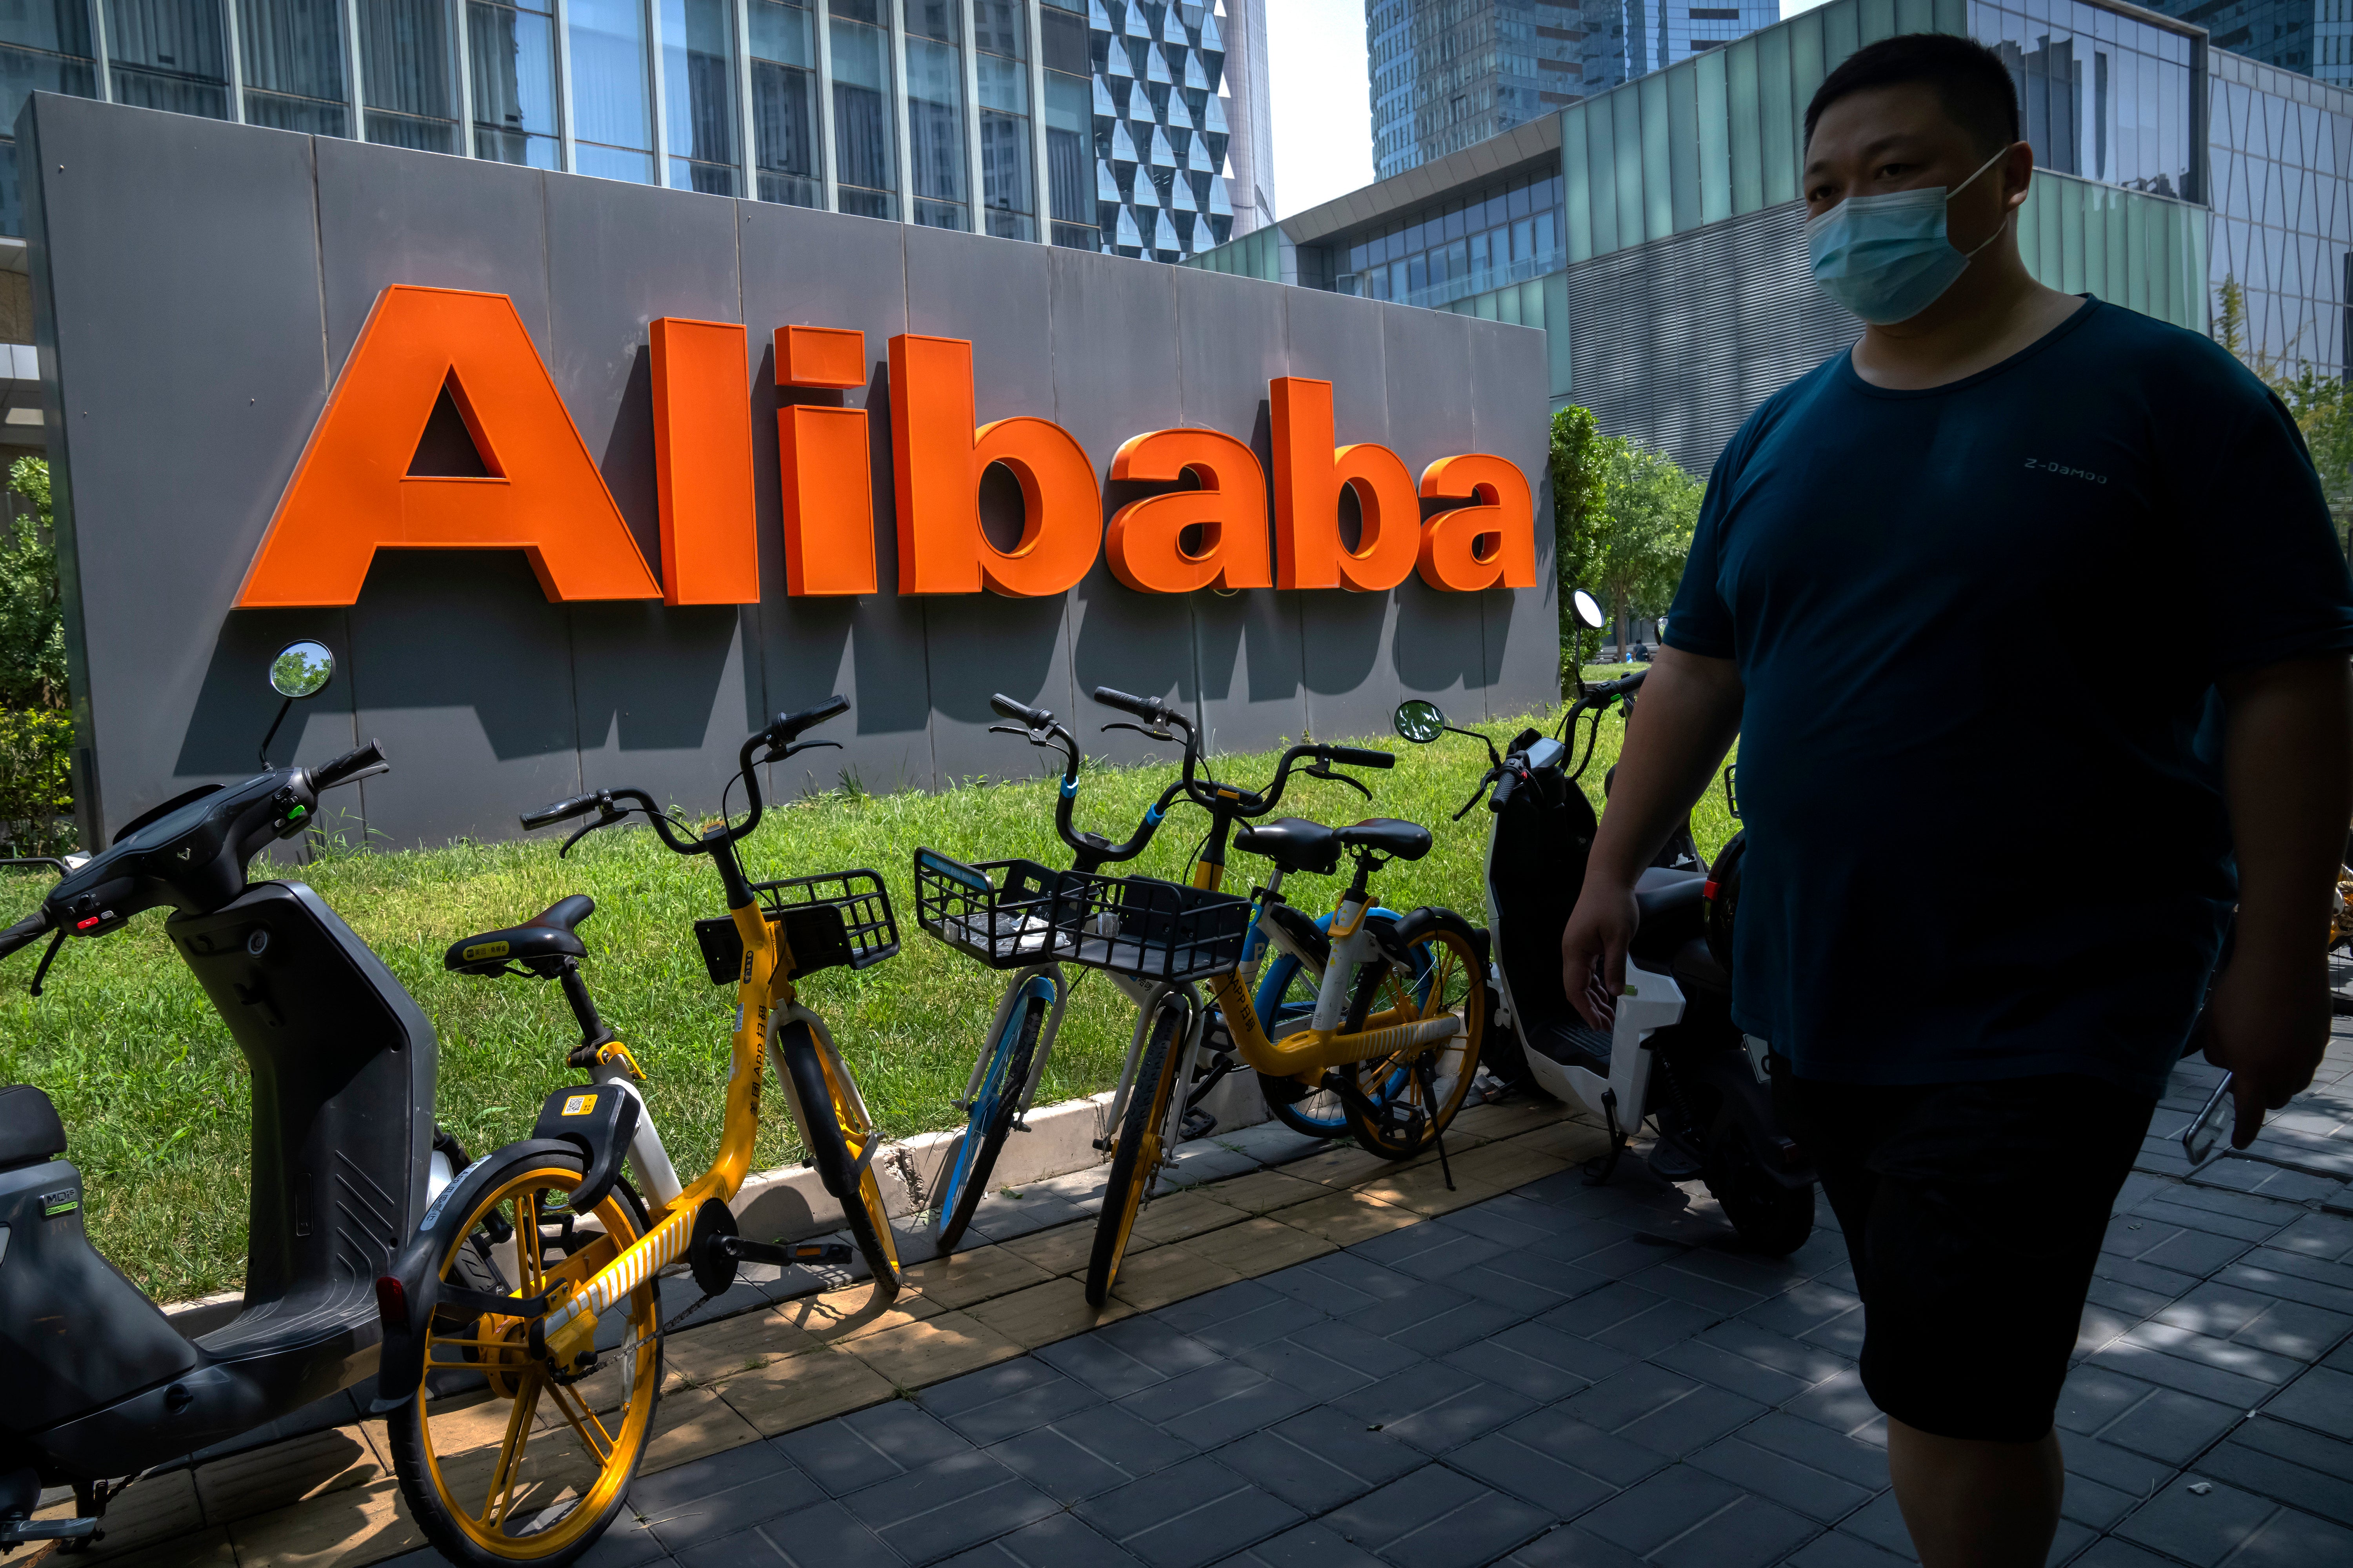 File: Allegations of rape by a woman employee of Alibaba Group has sent shockwaves in China’s tech industry